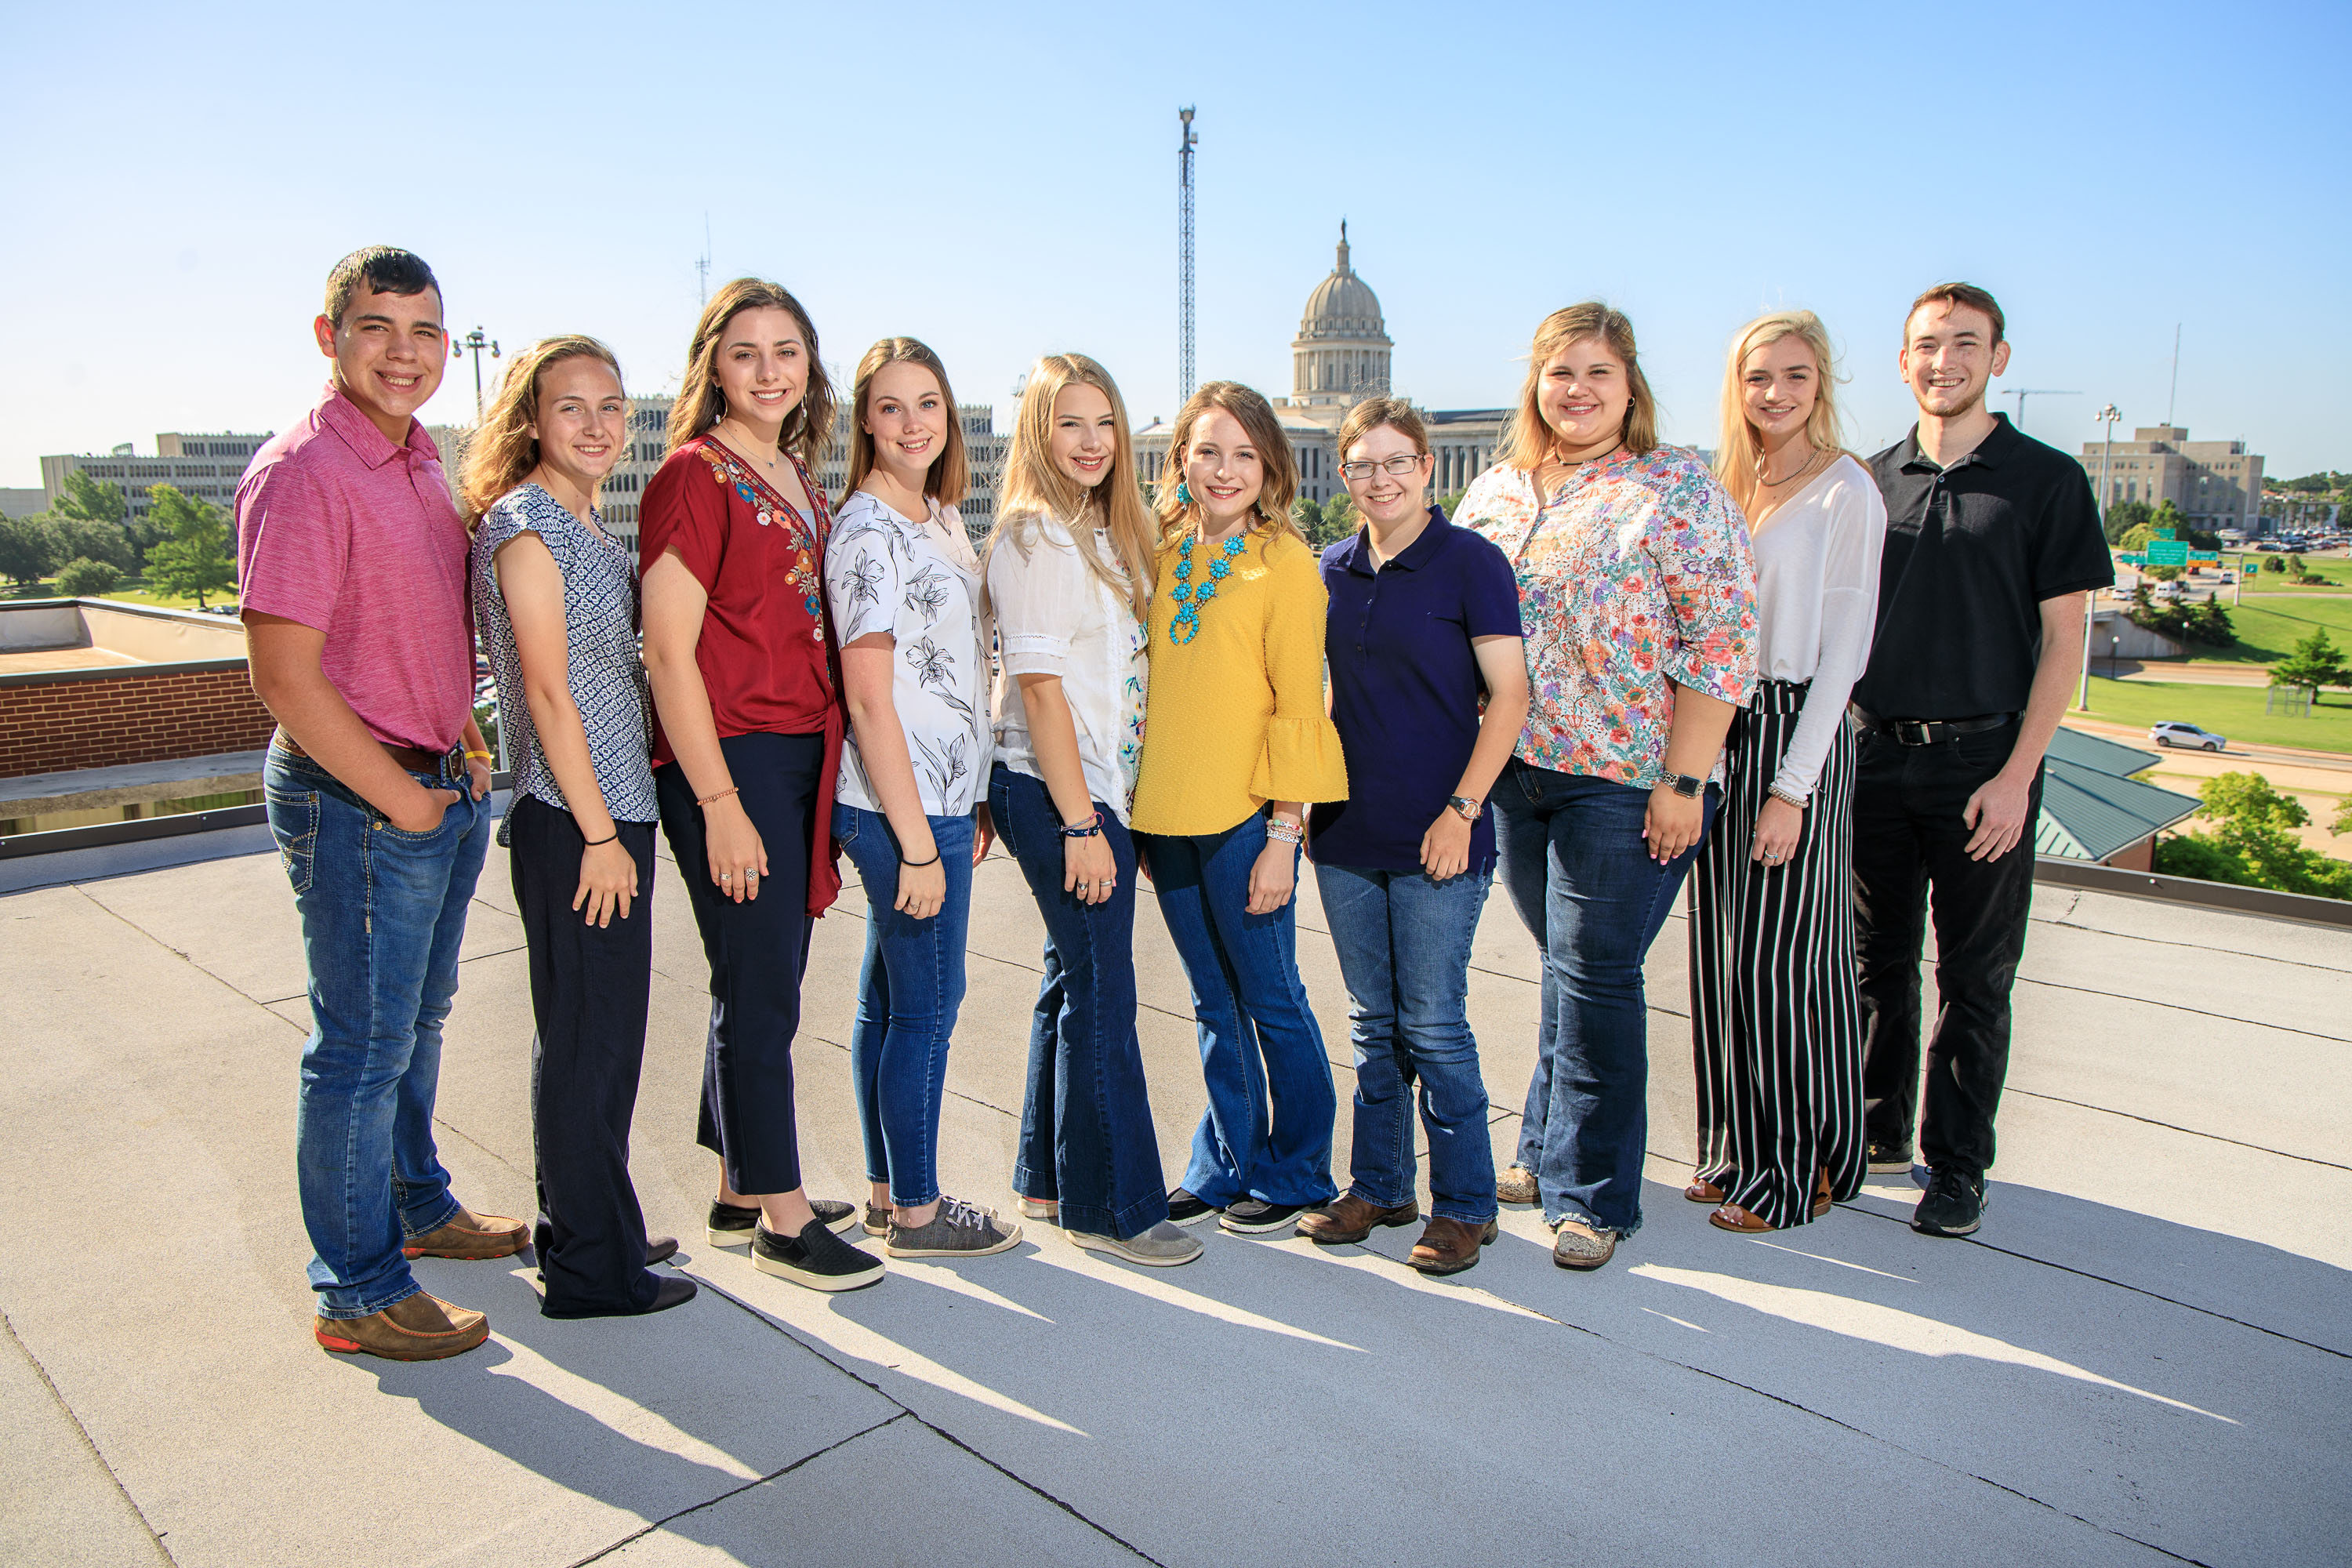 Oklahoma Farm Bureau hosted 10 high school students for youth leadership conference June 25-28